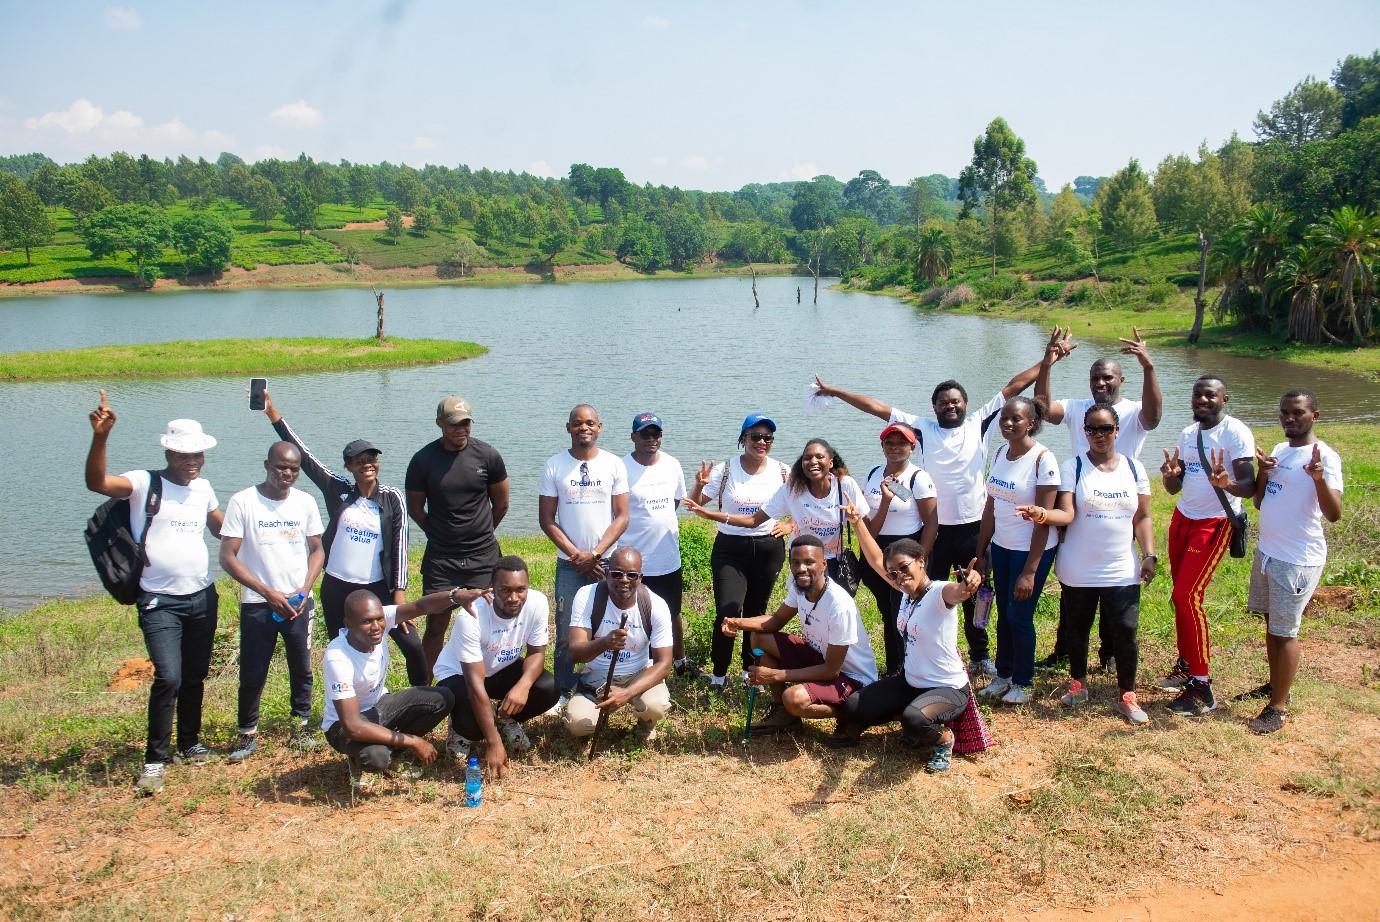 Some of the Blantyre staff captured at the walk along Makandi Dam